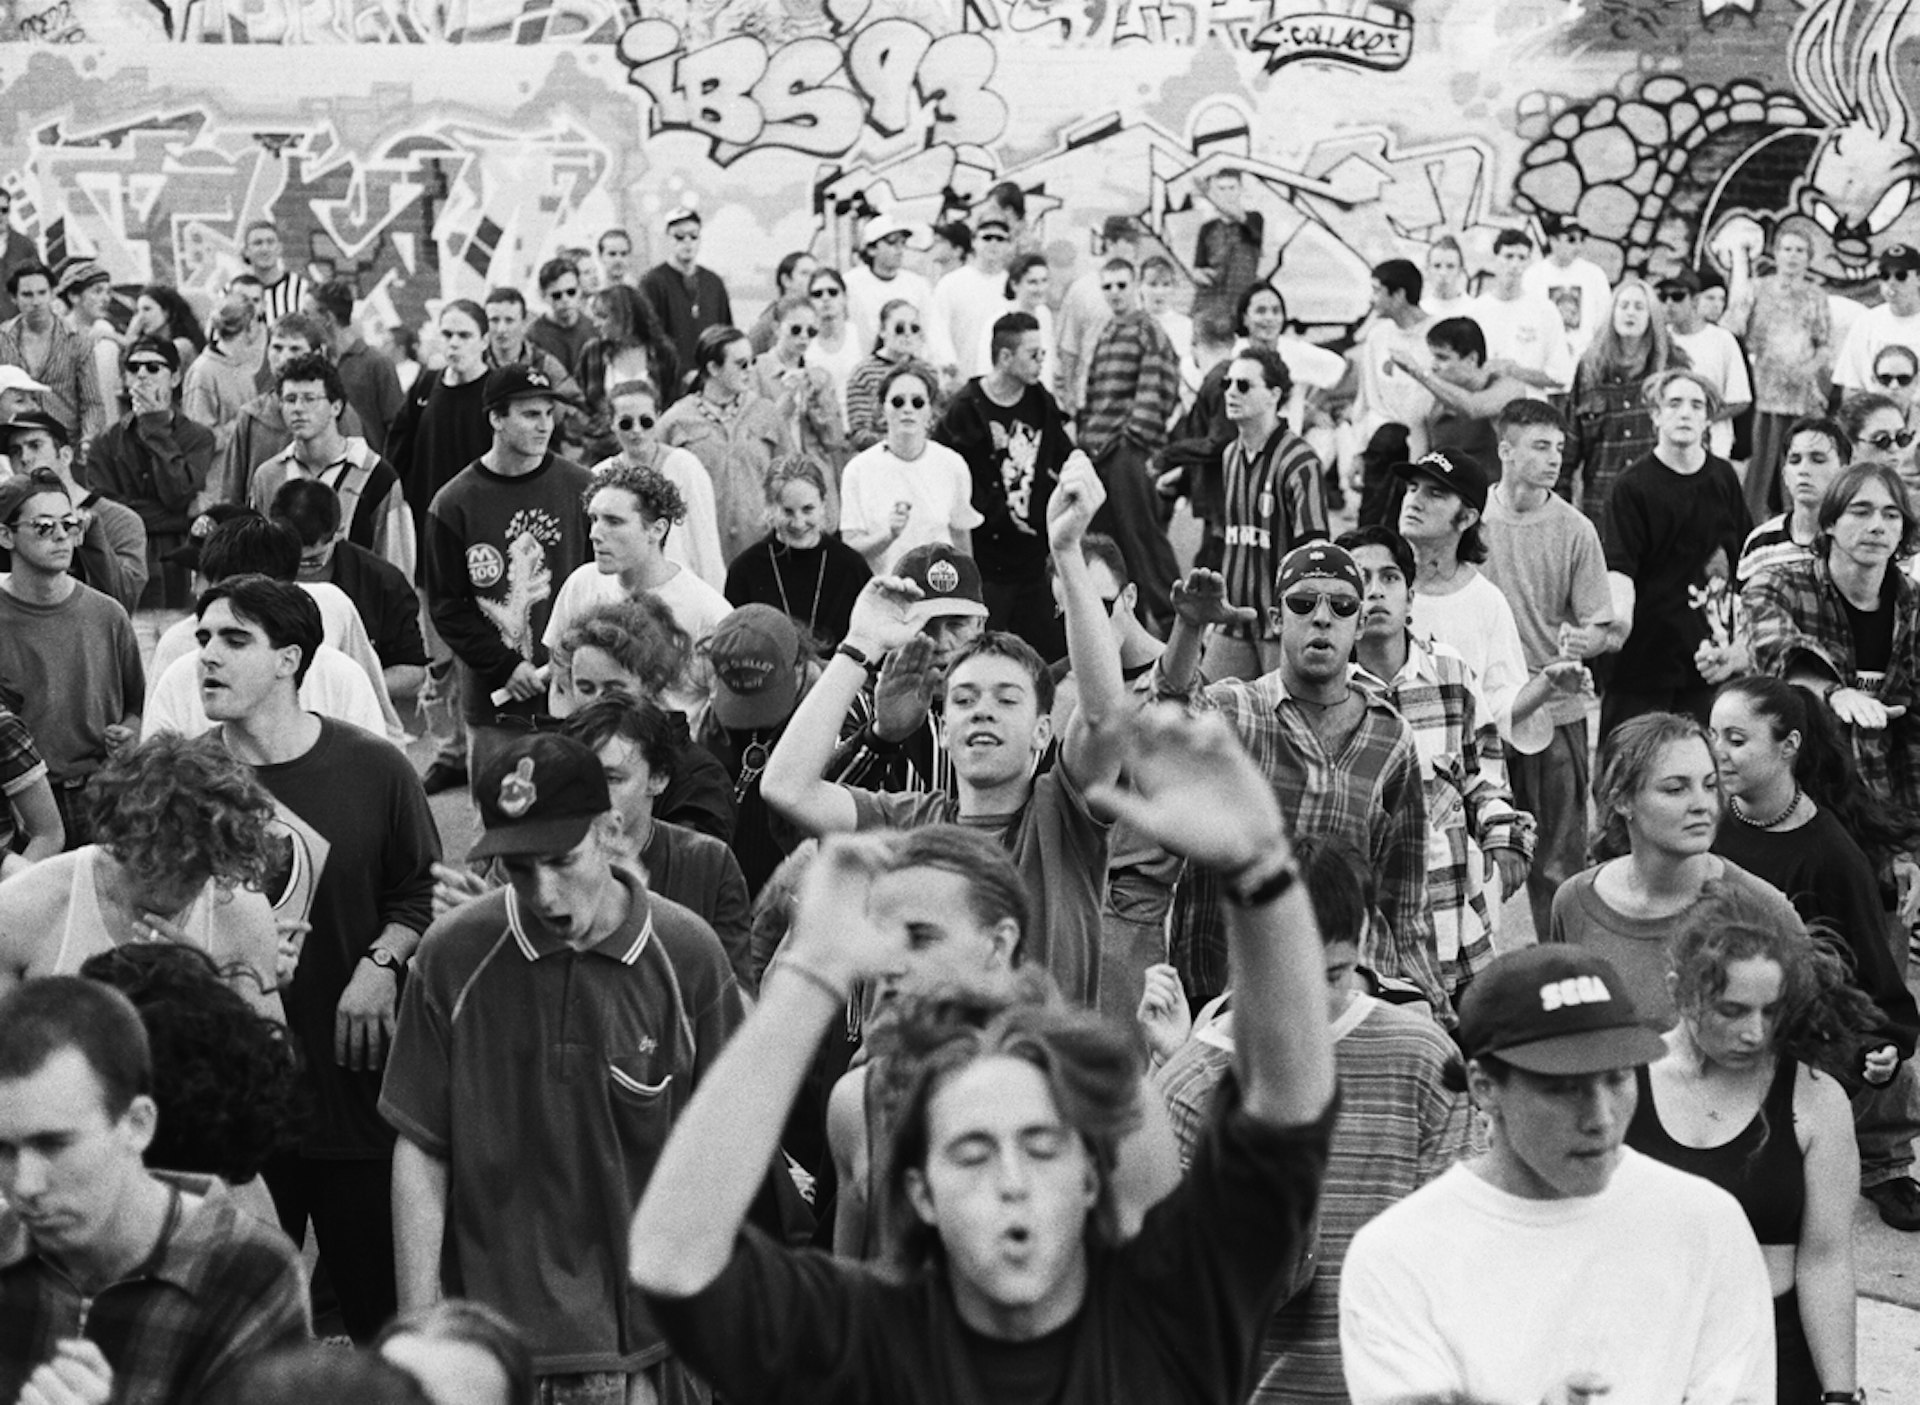 A teen's visual diary of the early-90s rave scene